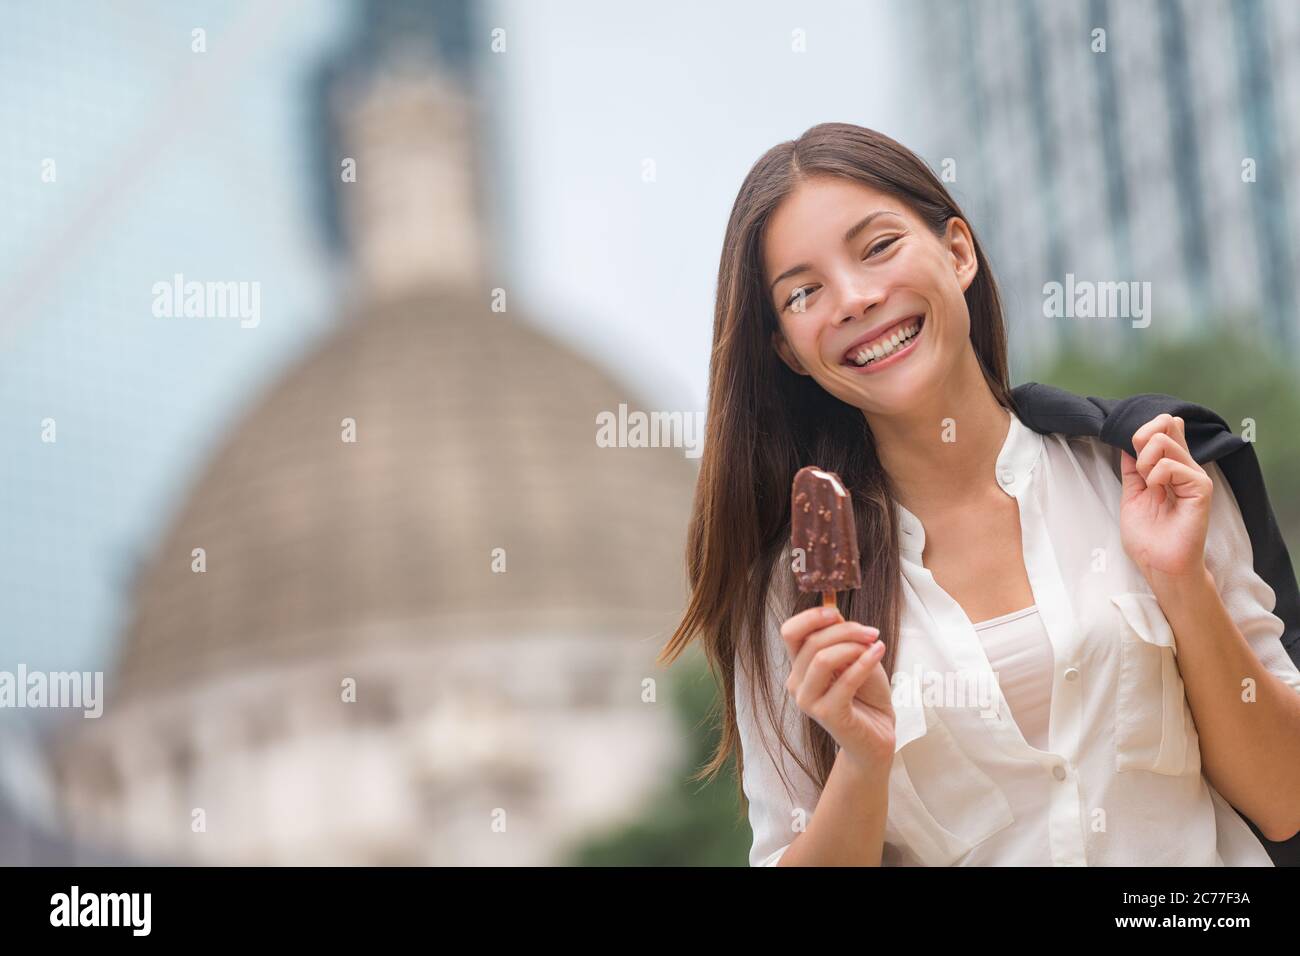 Business woman eating ice cream in Hong Kong. Young businesswoman enjoying ice-cream on at stick walking outside smiling happy in central Hong Kong Stock Photo